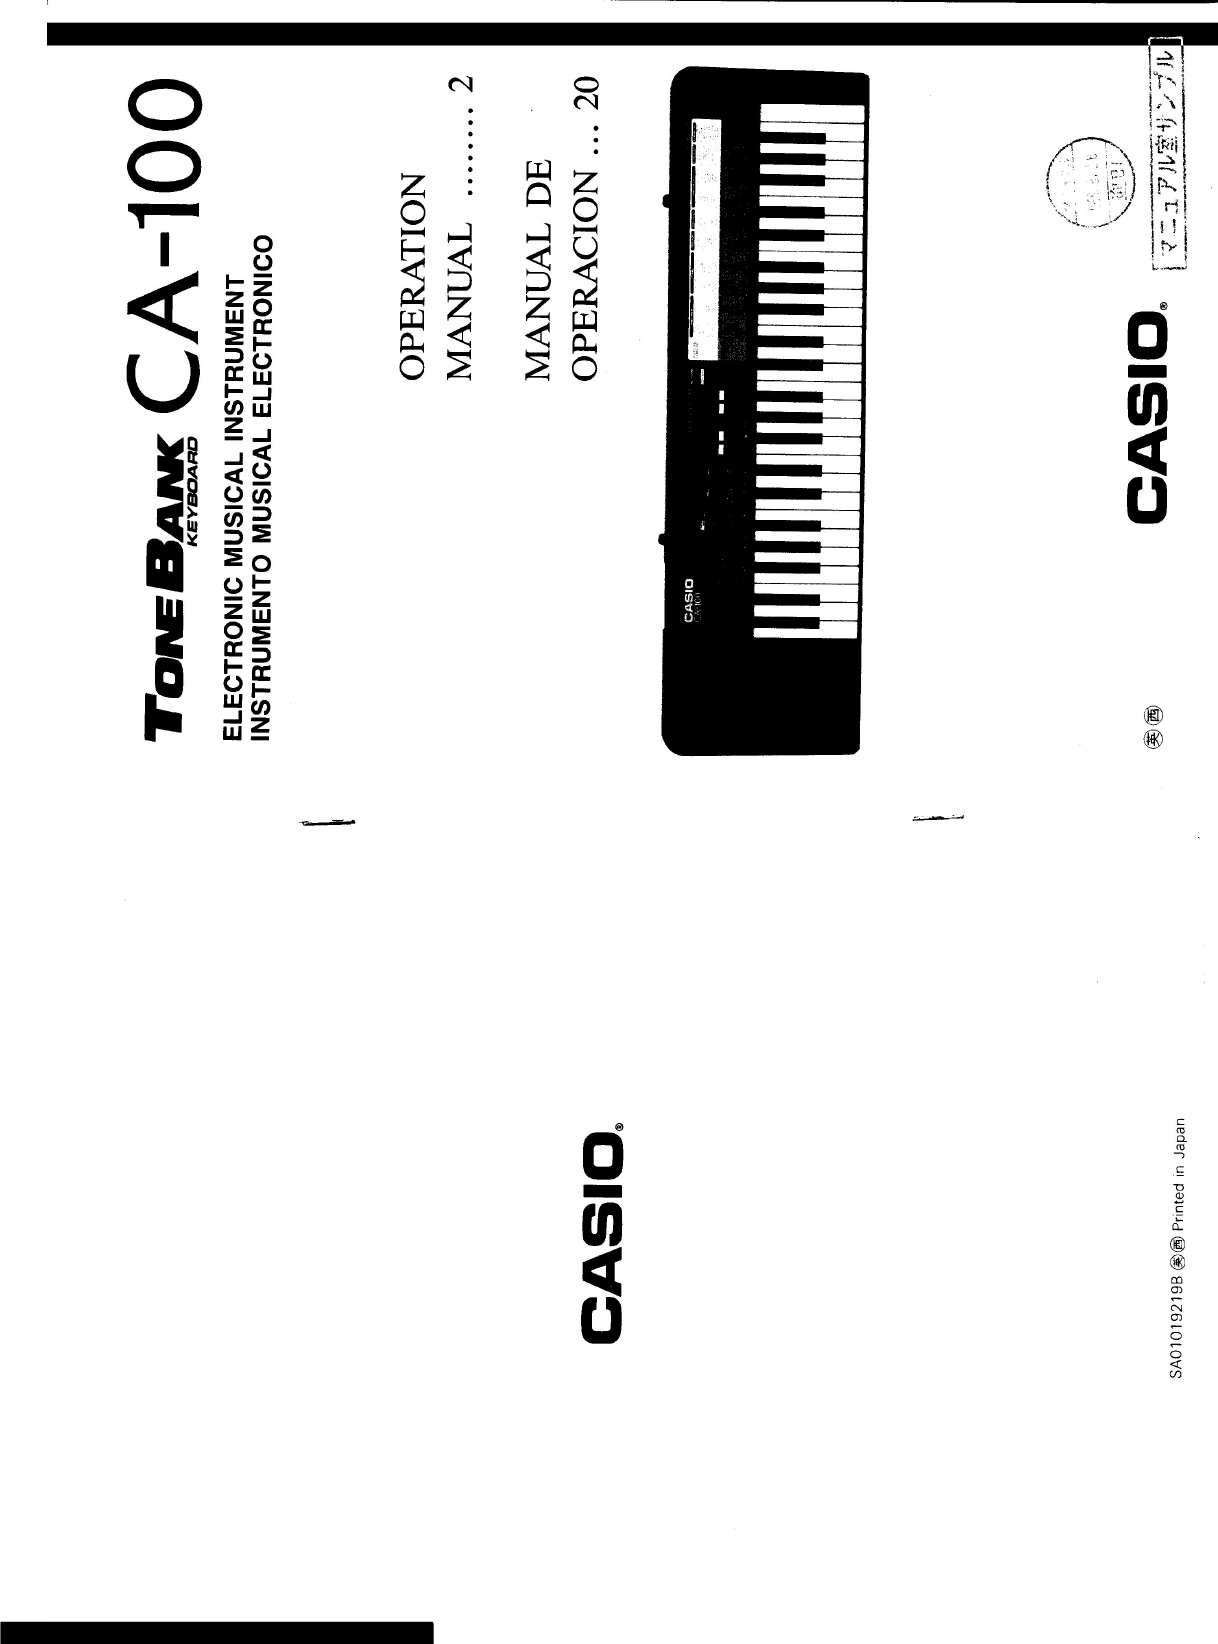 casio owners manuals online